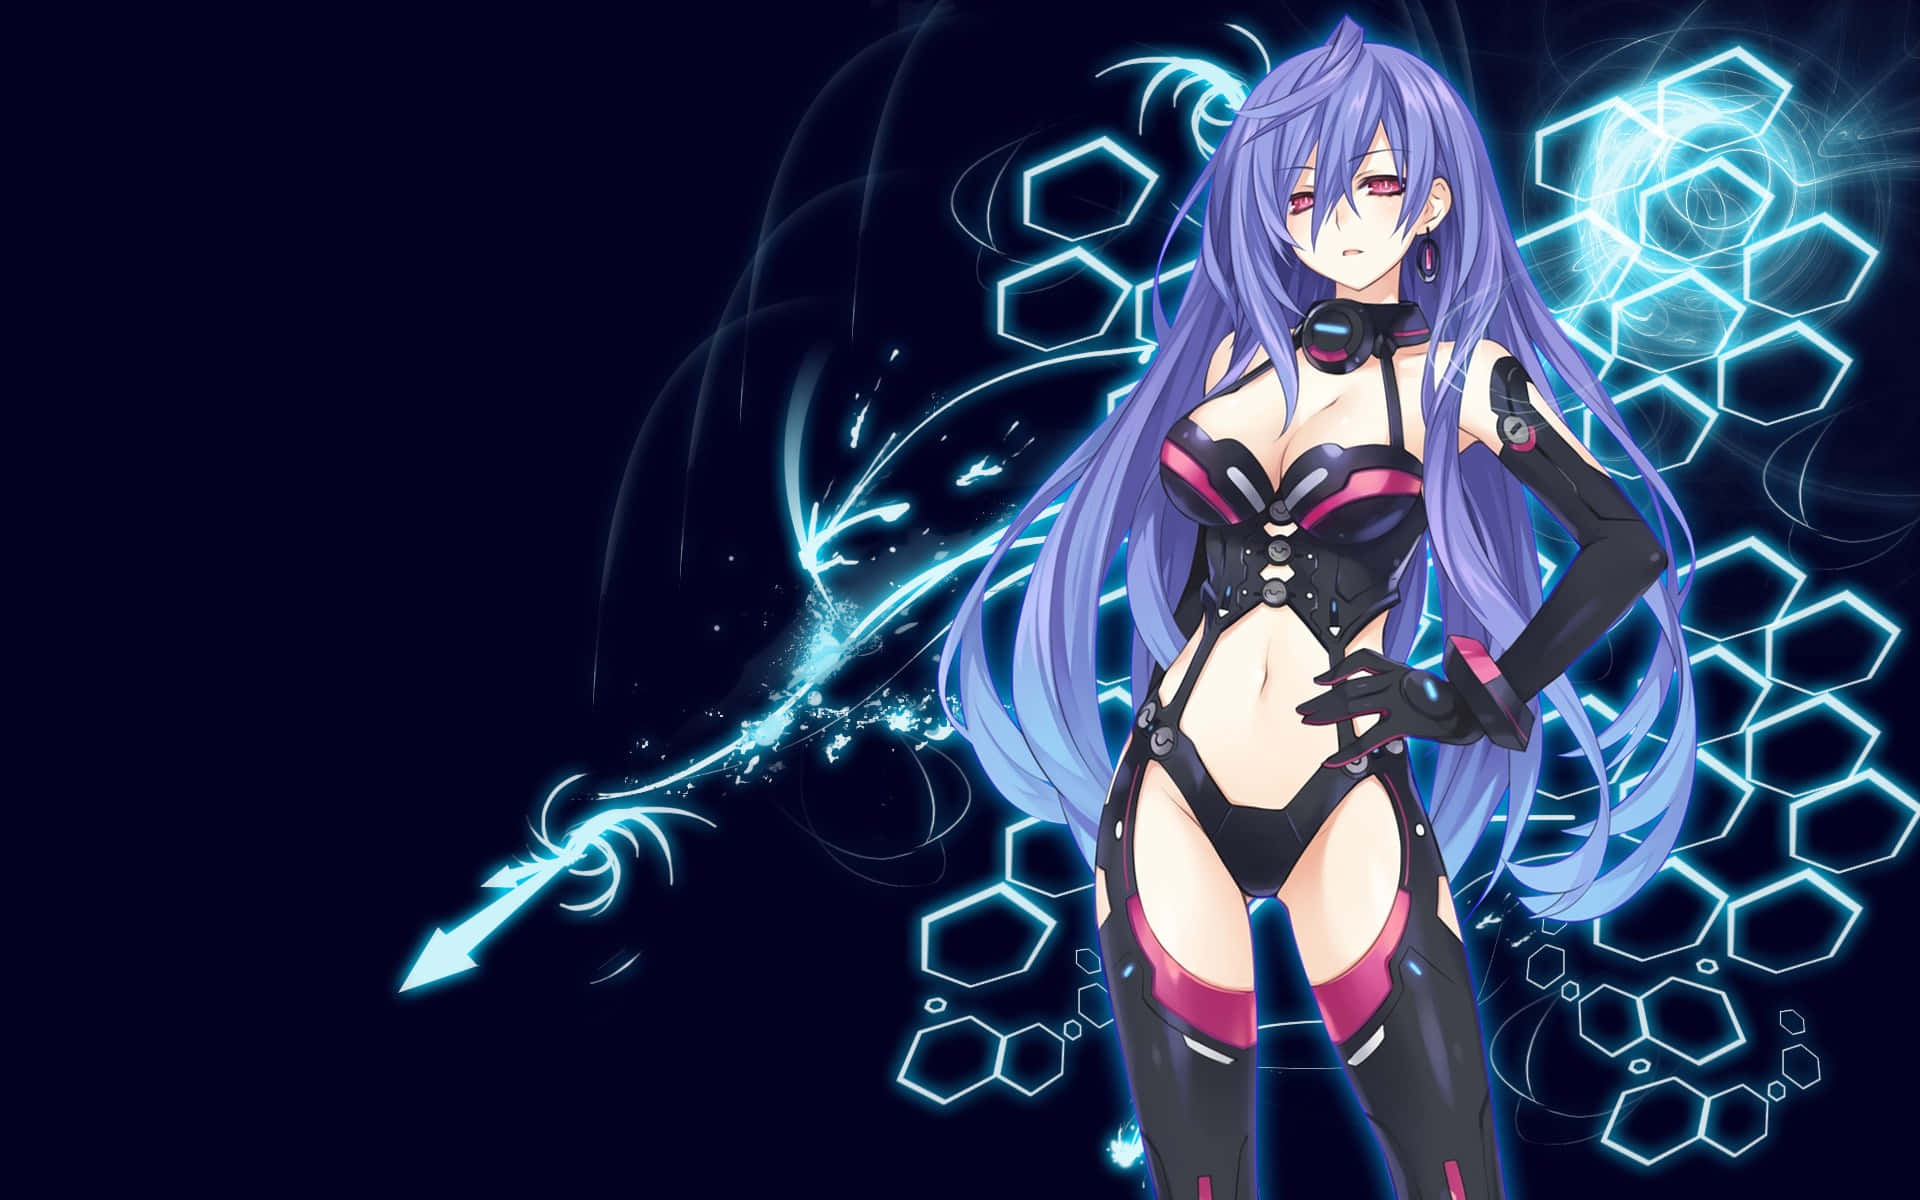 Journey with Neptune and her friends in the world of Hyperdimension Neptunia Wallpaper